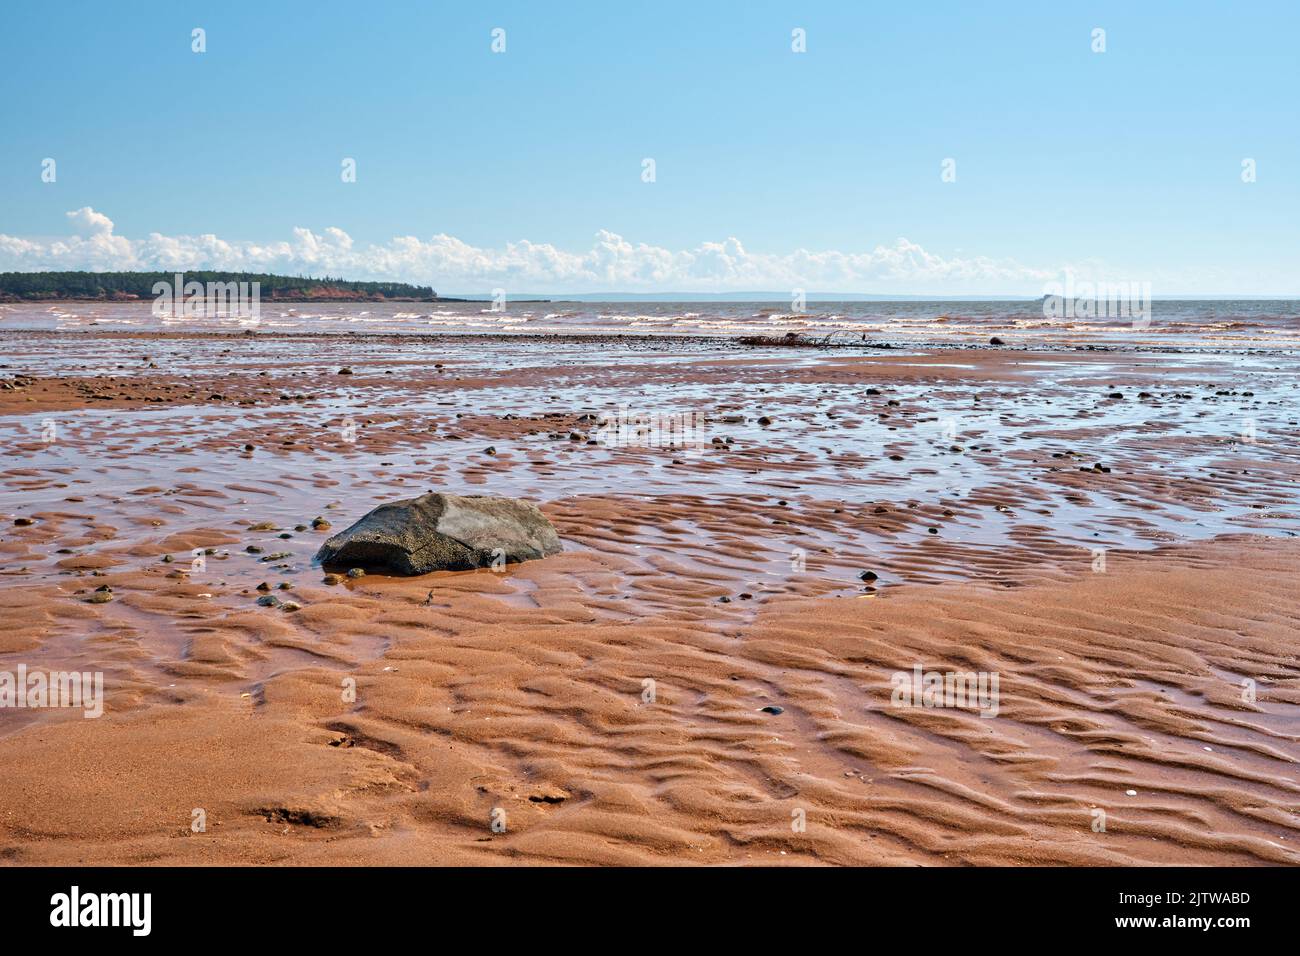 The beach in Economy Nova Scotia is located on the Bay of Fundy where this photograph was taken at low tide. Stock Photo